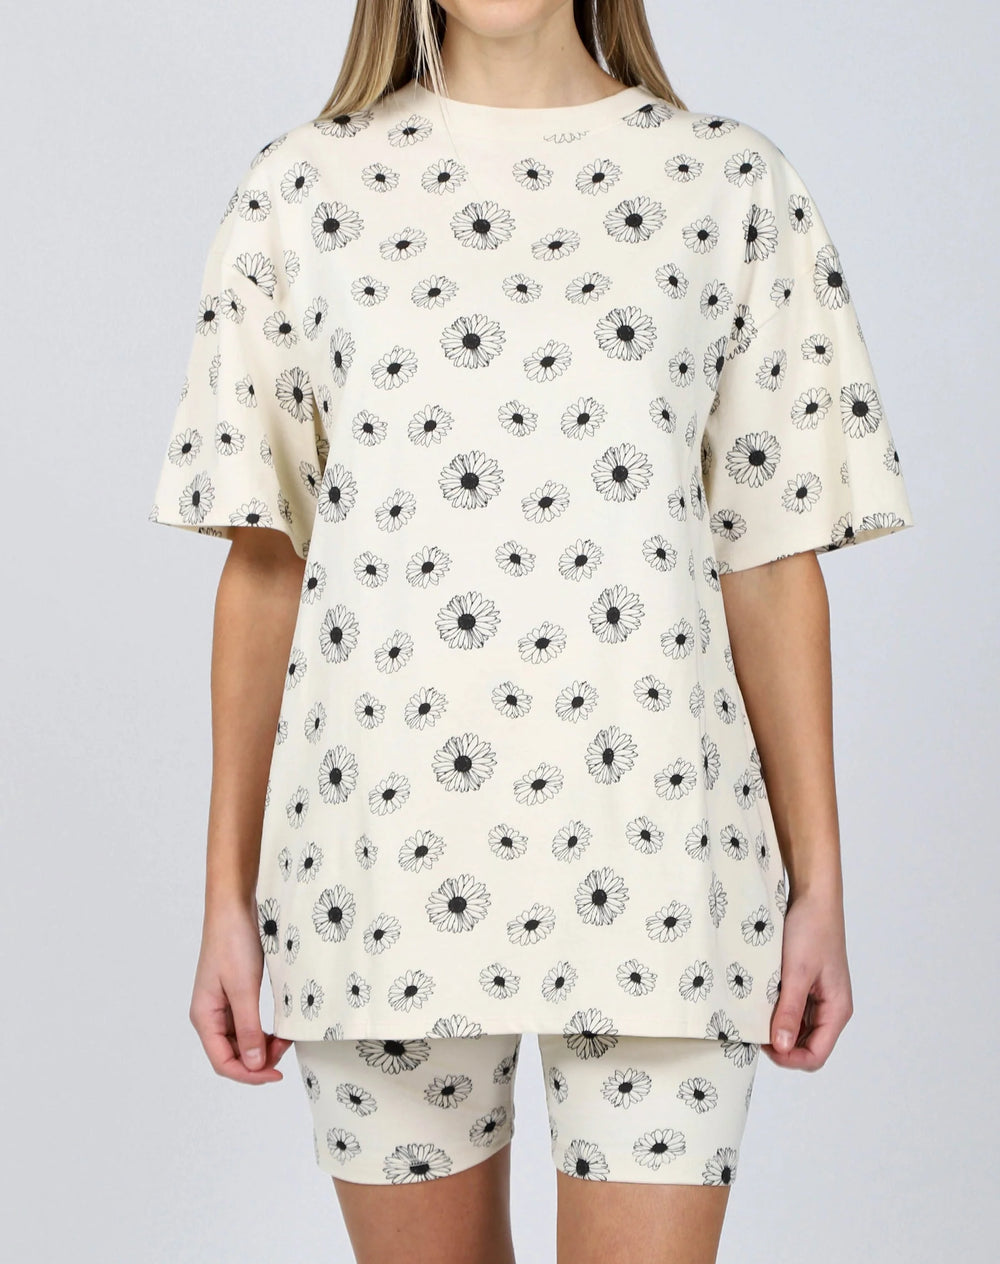 All Over Daisy Print Tee by Brunette The Label